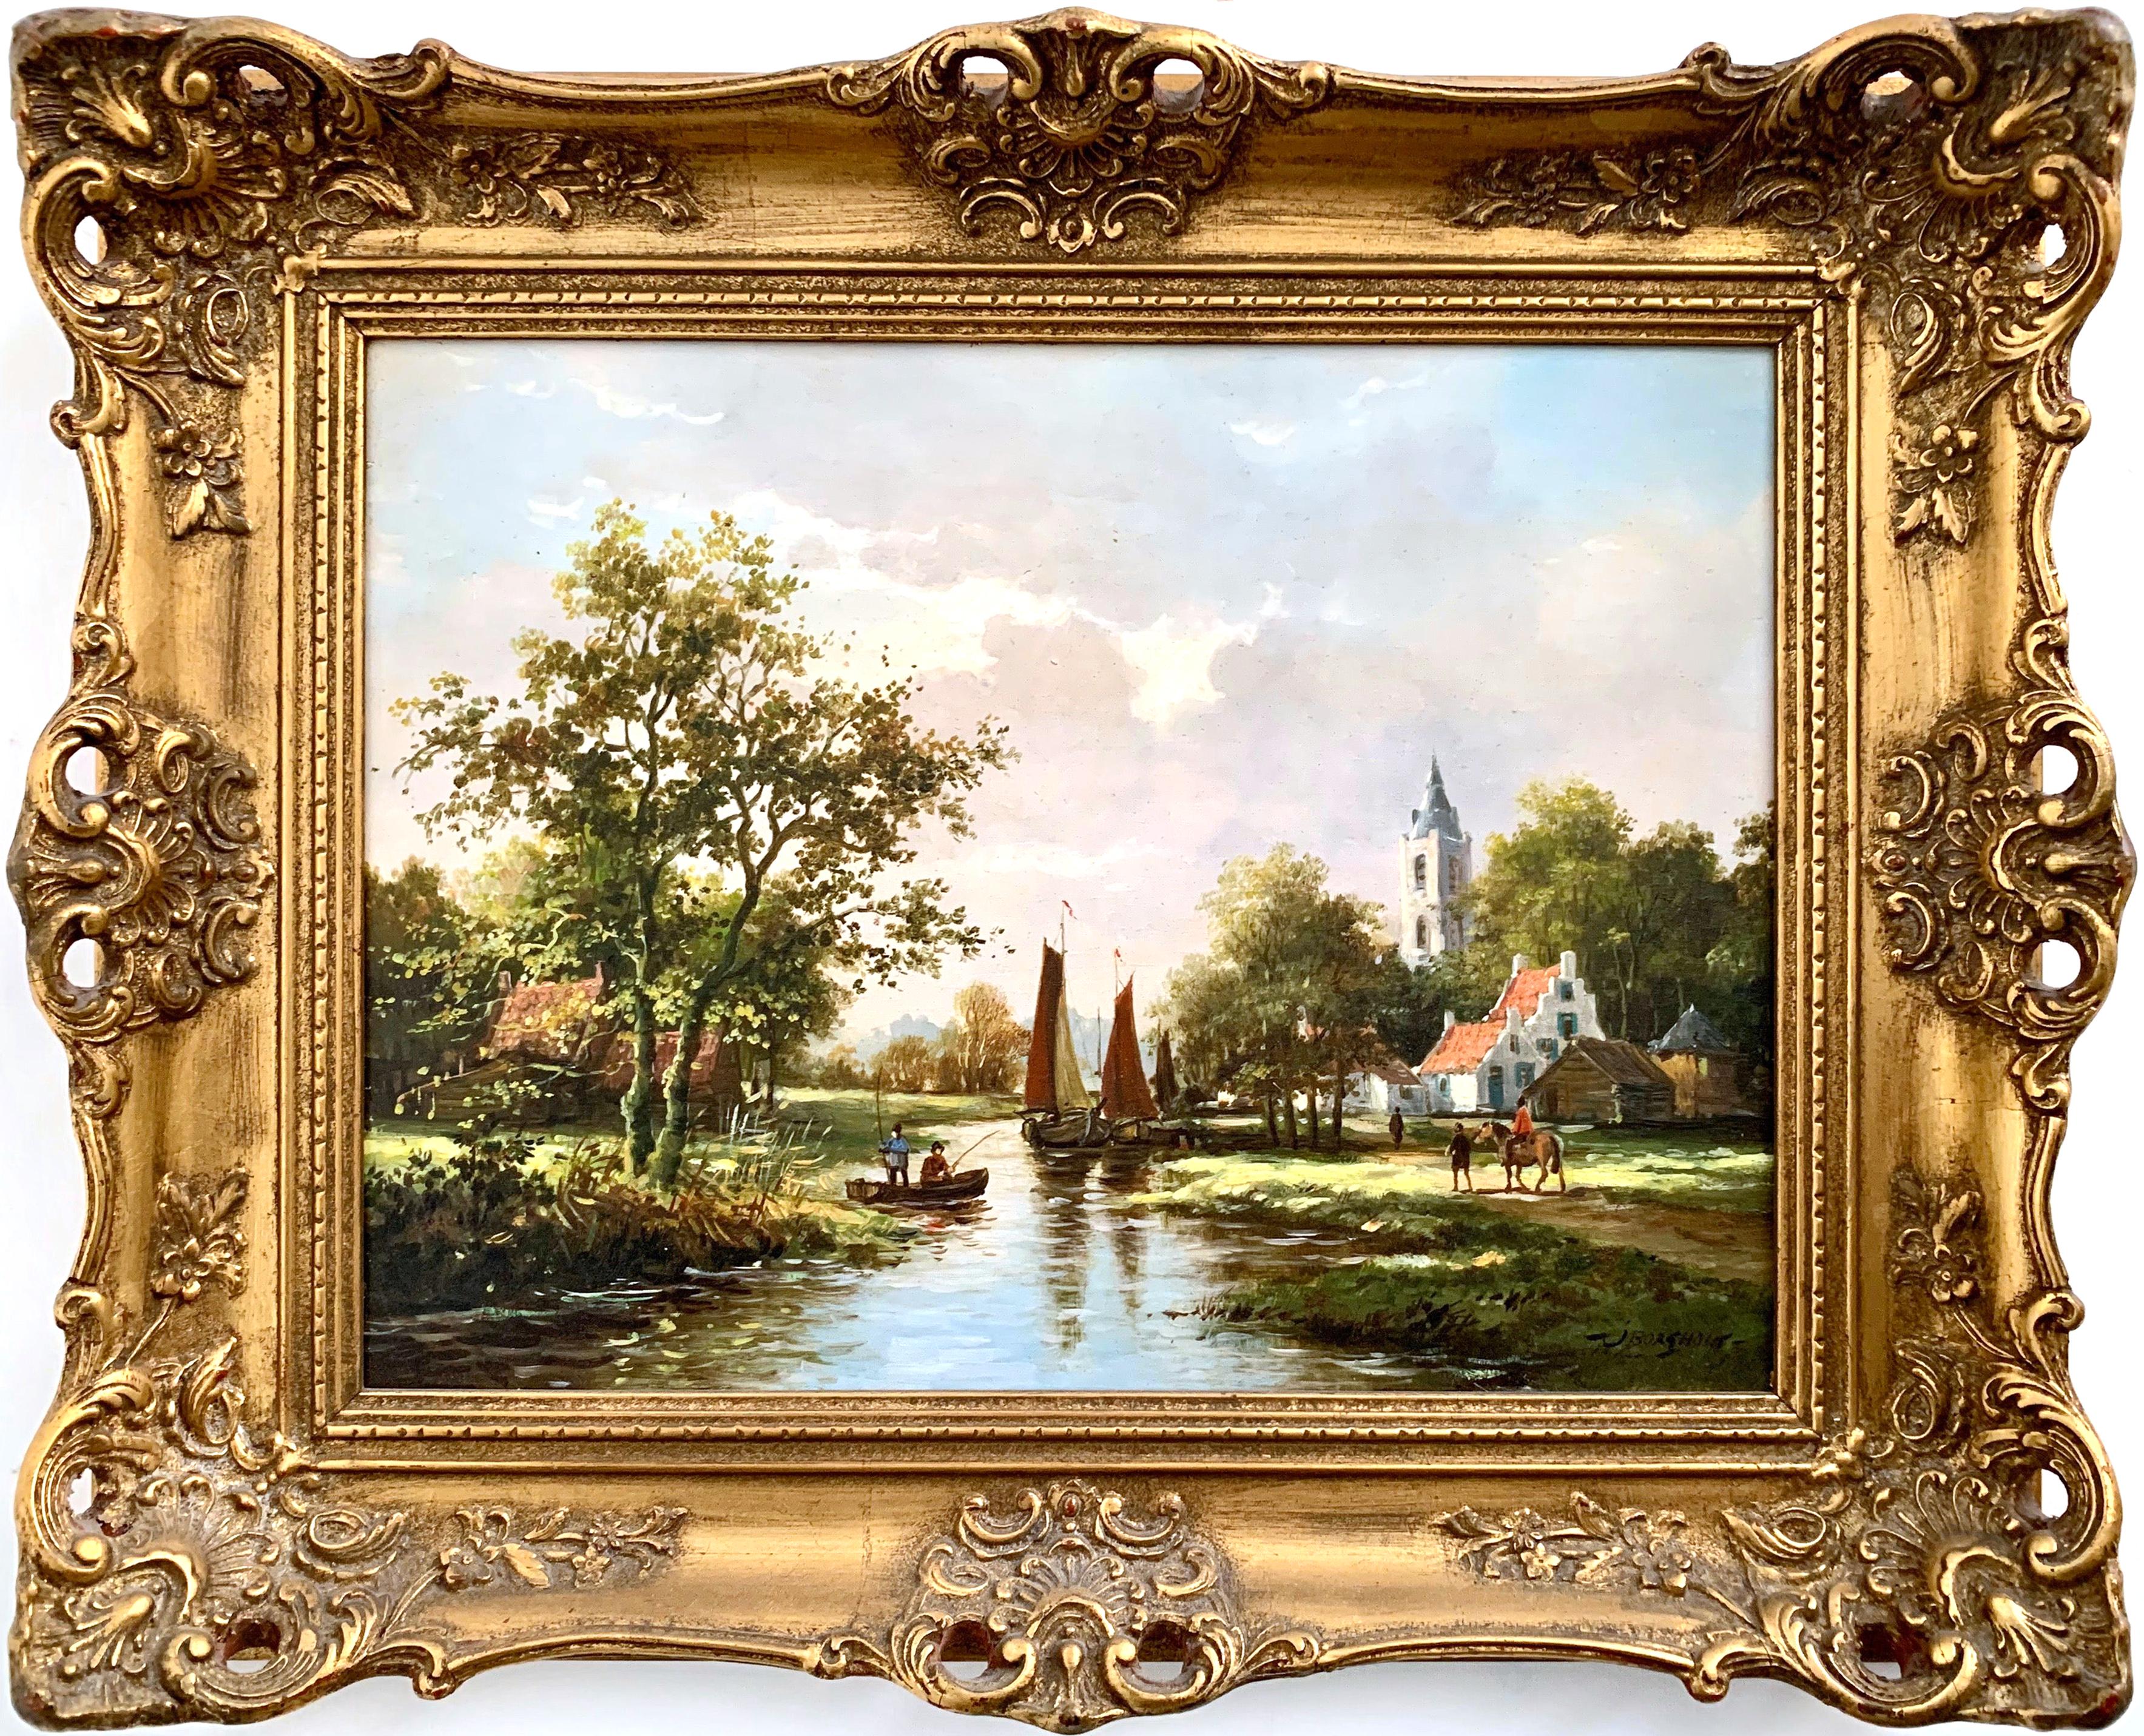 J Borghout Landscape Painting - Classical Traditional 20th Century River Landscape Oil Painting by Dutch Painter